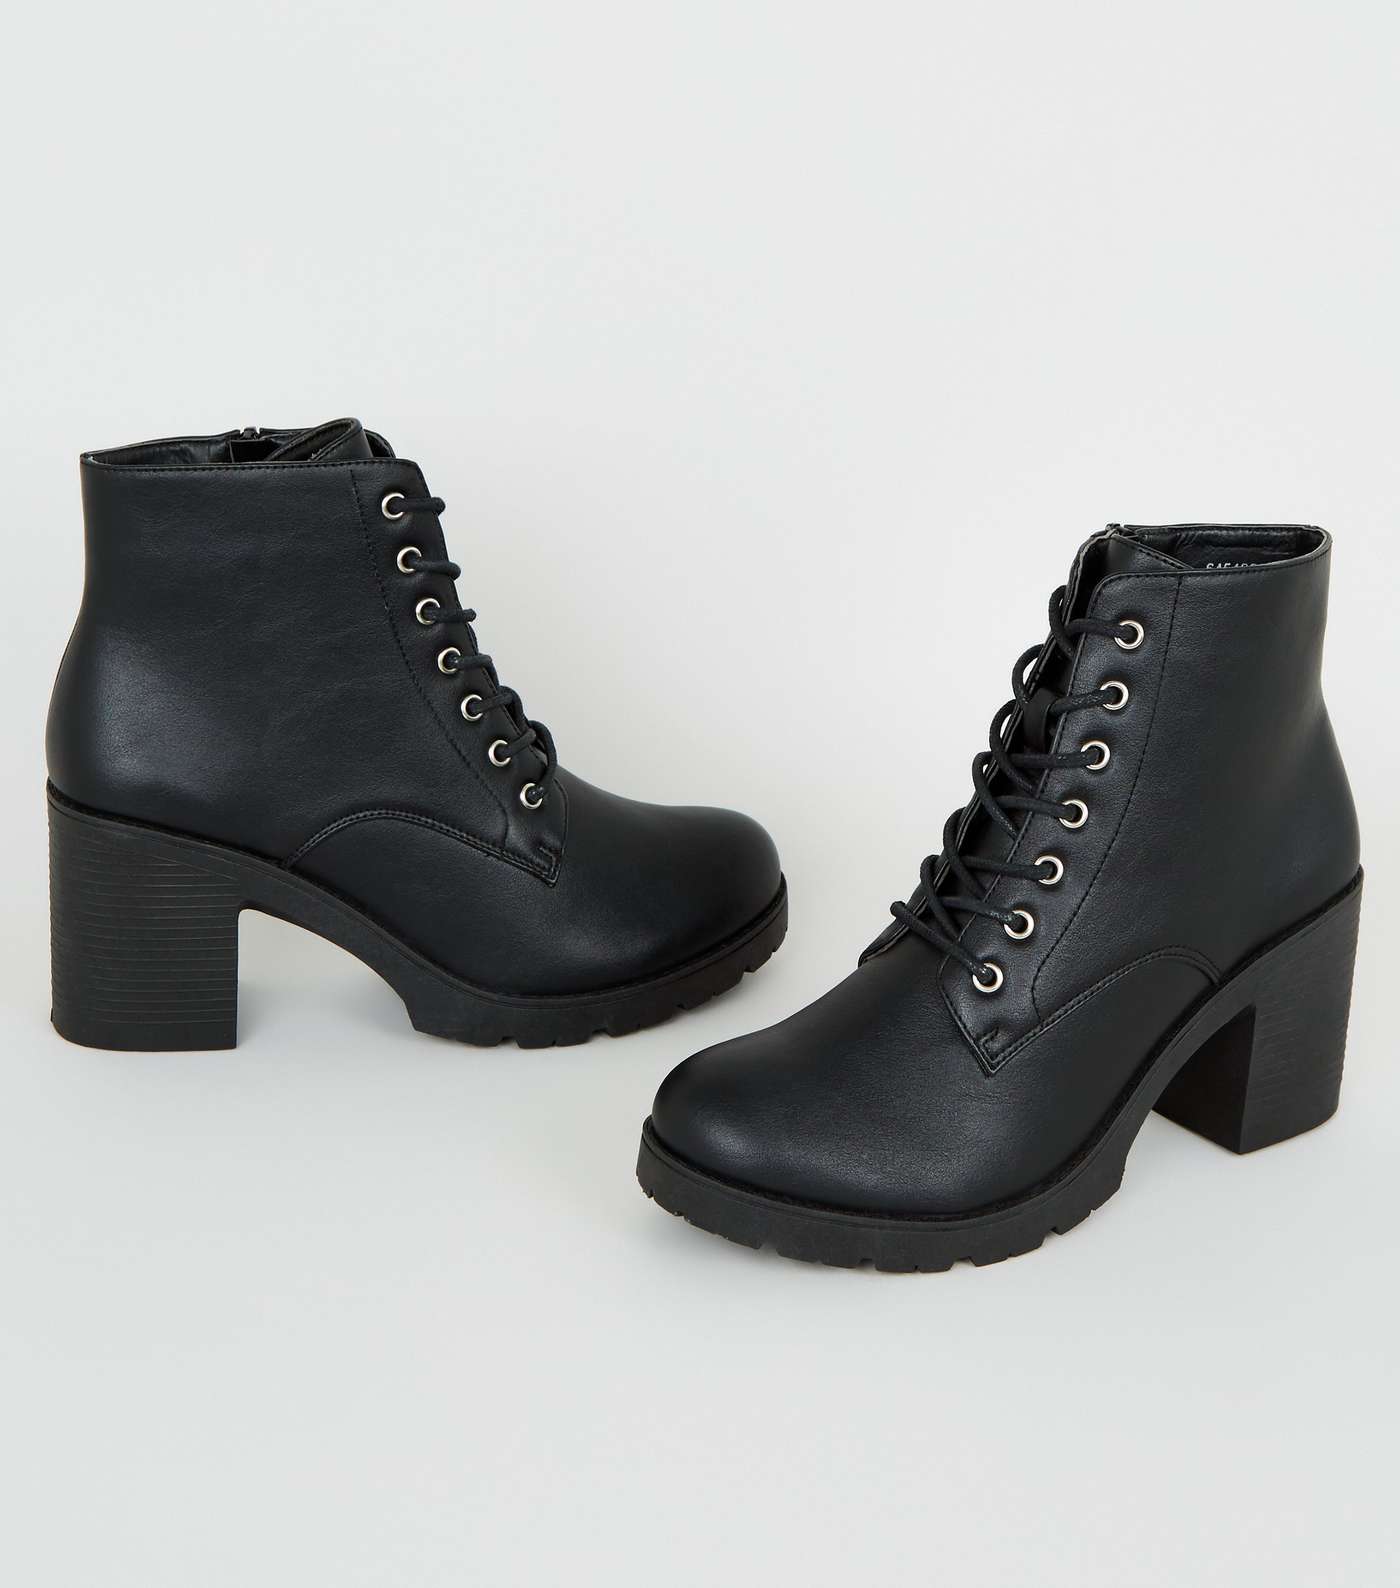 Black Leather-Look Lace Up Heeled Boots Image 3